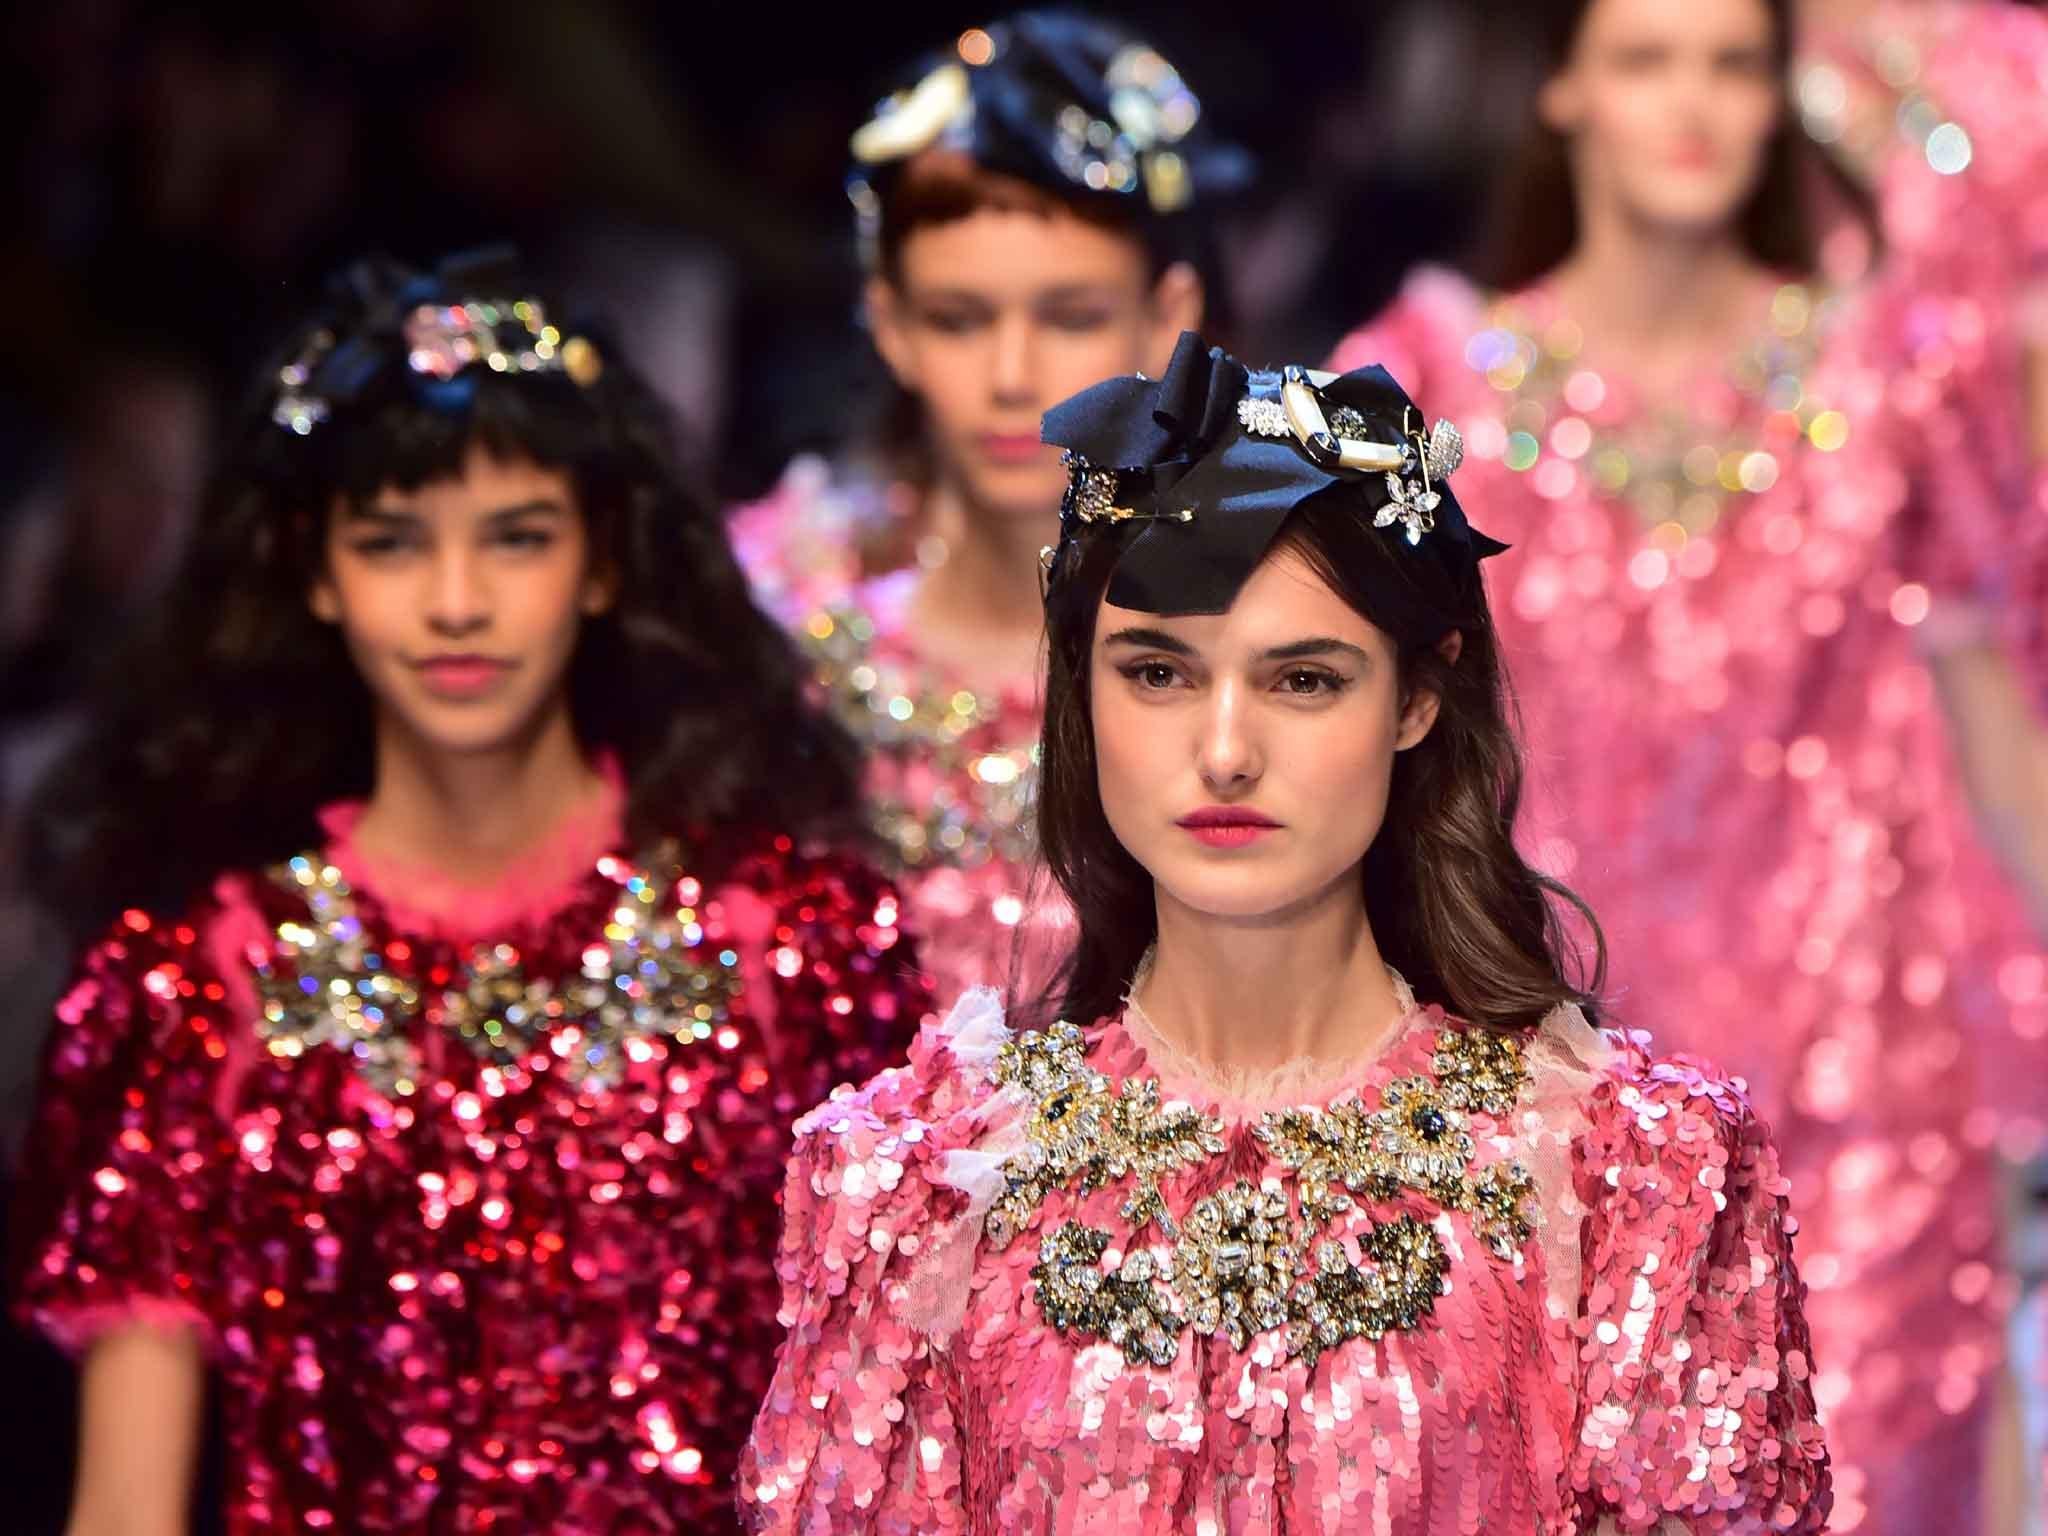 Dolce & Gabbana Autumn Winter 2016 line proves pink is out to dazzle in the seasons ahead AFP/Getty